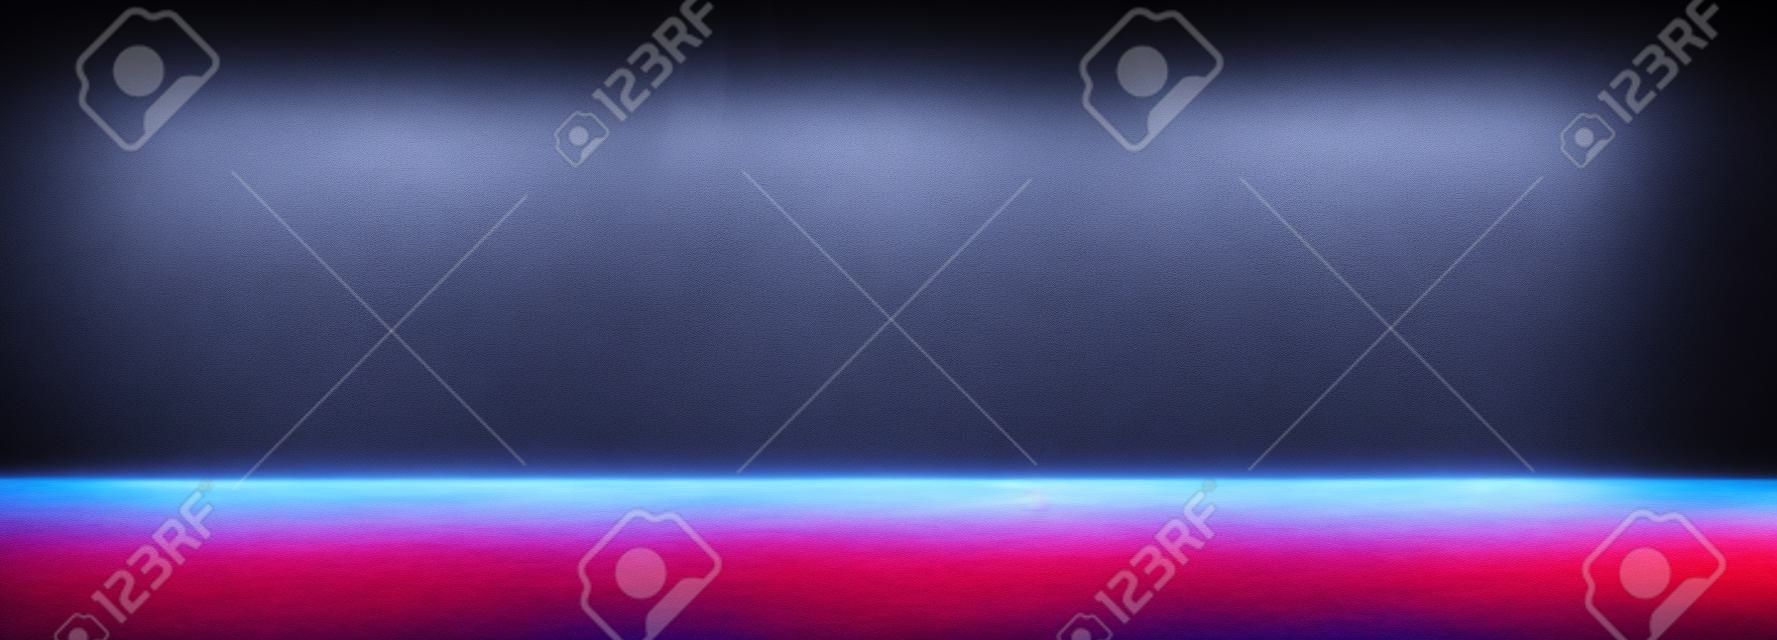 Empty space of Studio dark room with fog or mist and lighting effect red and blue on concrete floor gradient background.